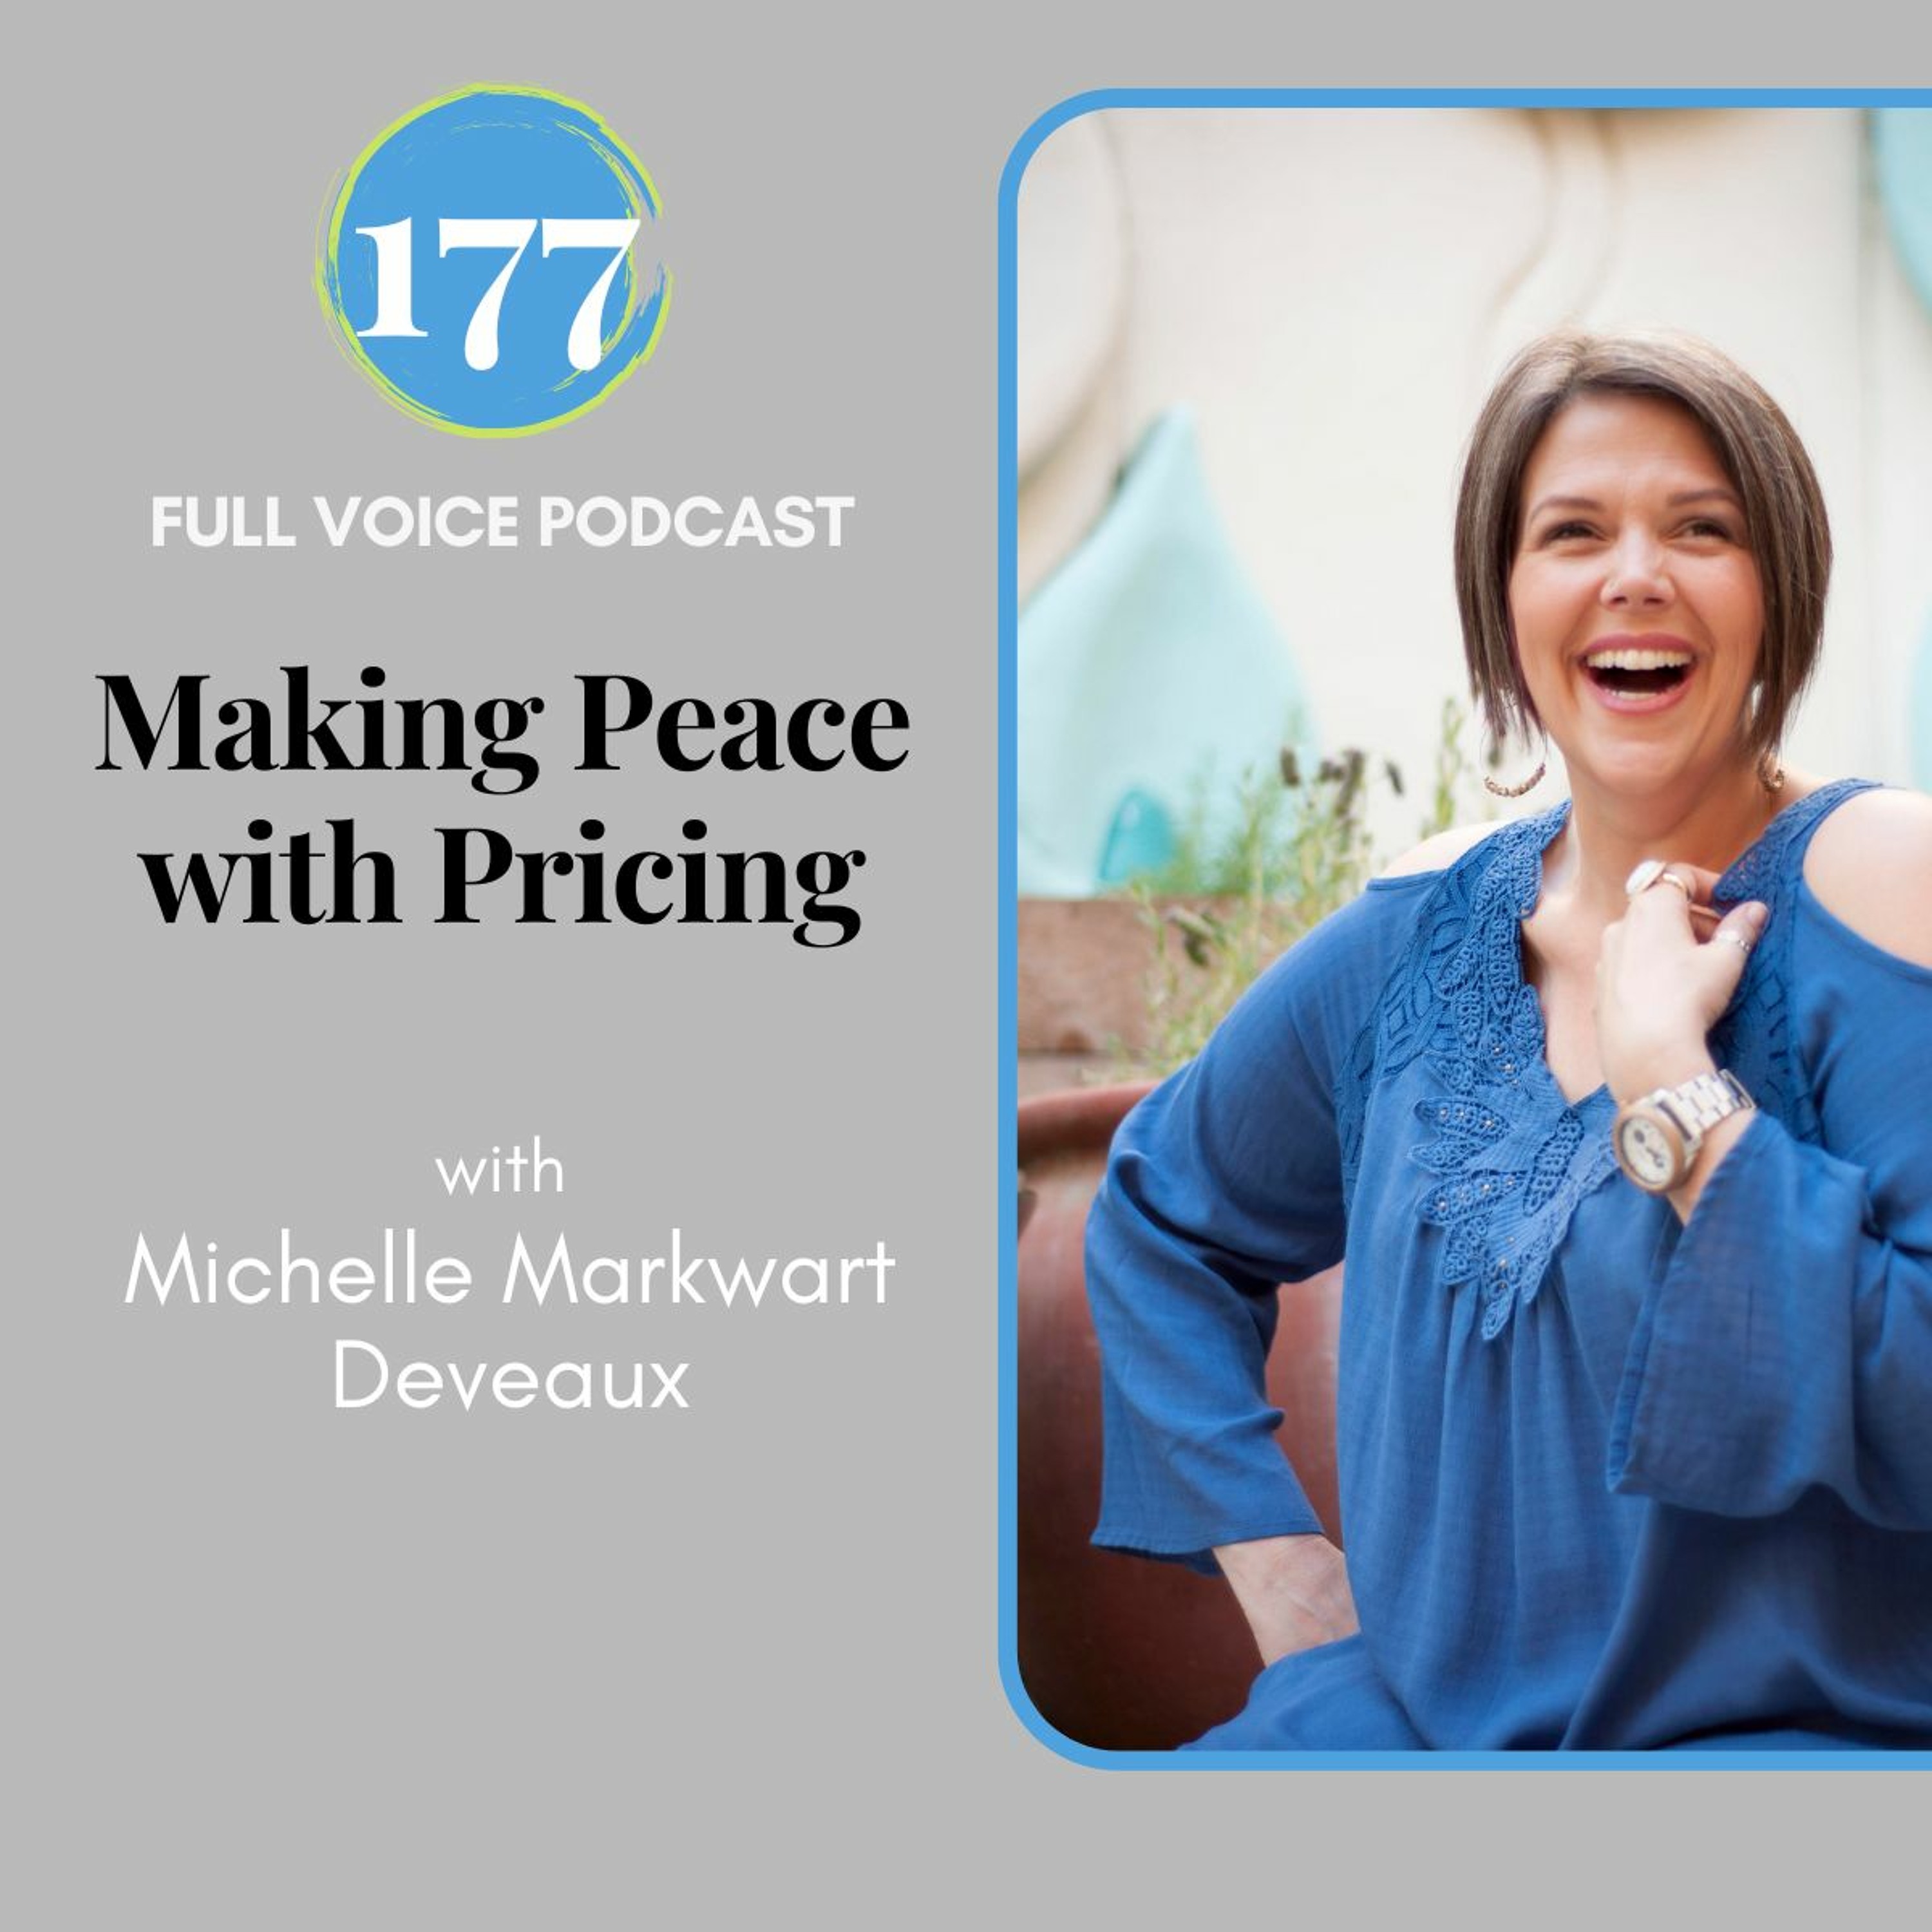 FVPC #177 Making Peace with Pricing with Michelle Markwart Deveaux